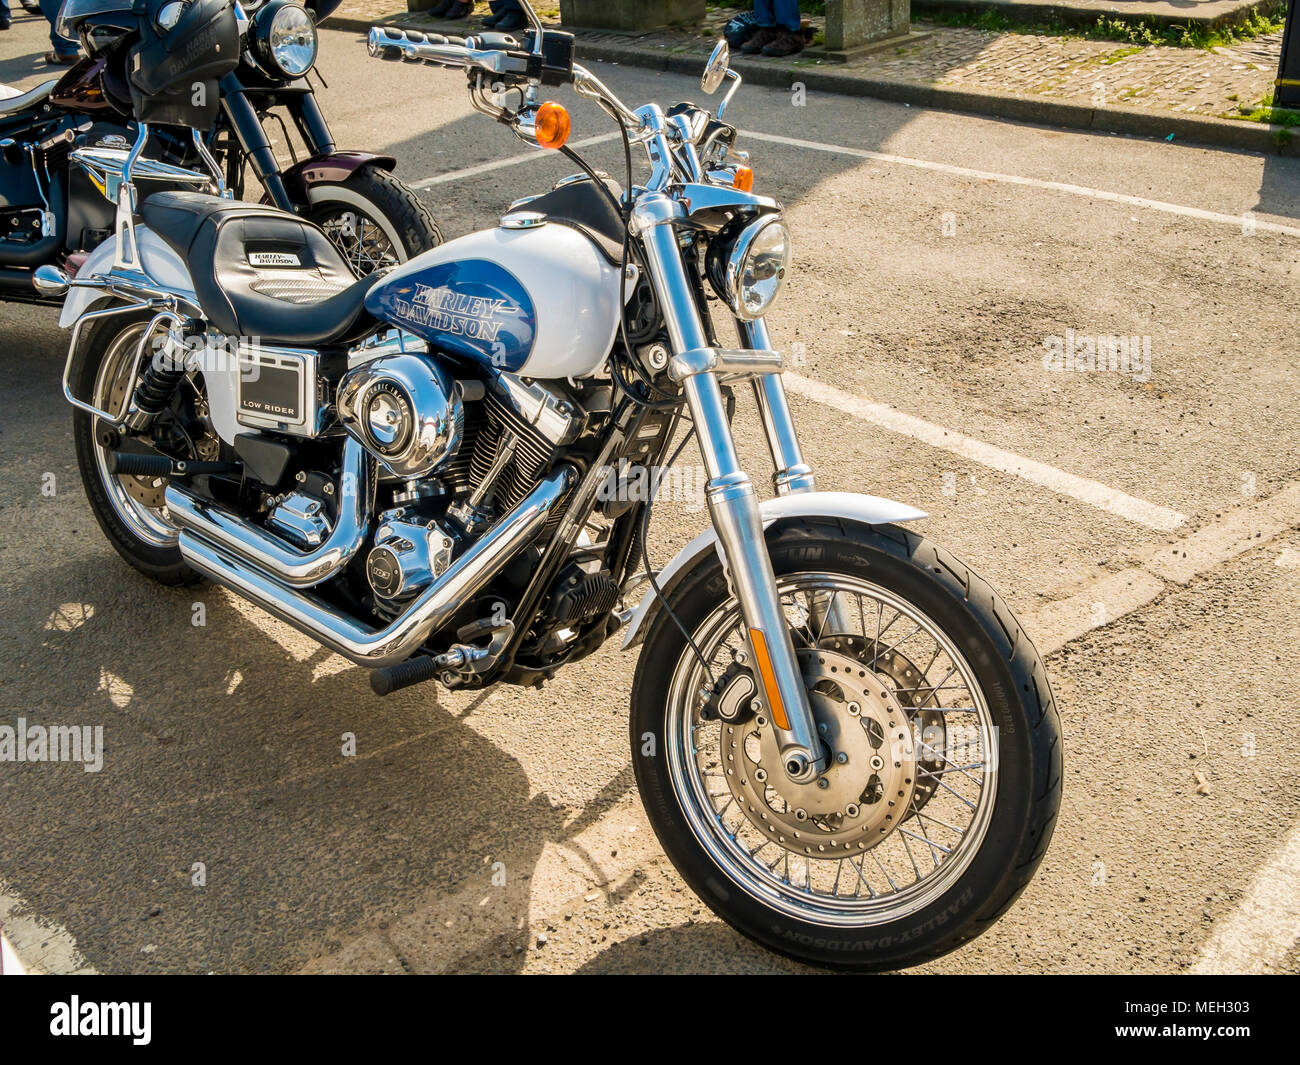 A Harley Davdson Low Rider motor cycle with a 103 cubic inch engine parked  in Helmsley Market Place North Yorkshire England Stock Photo